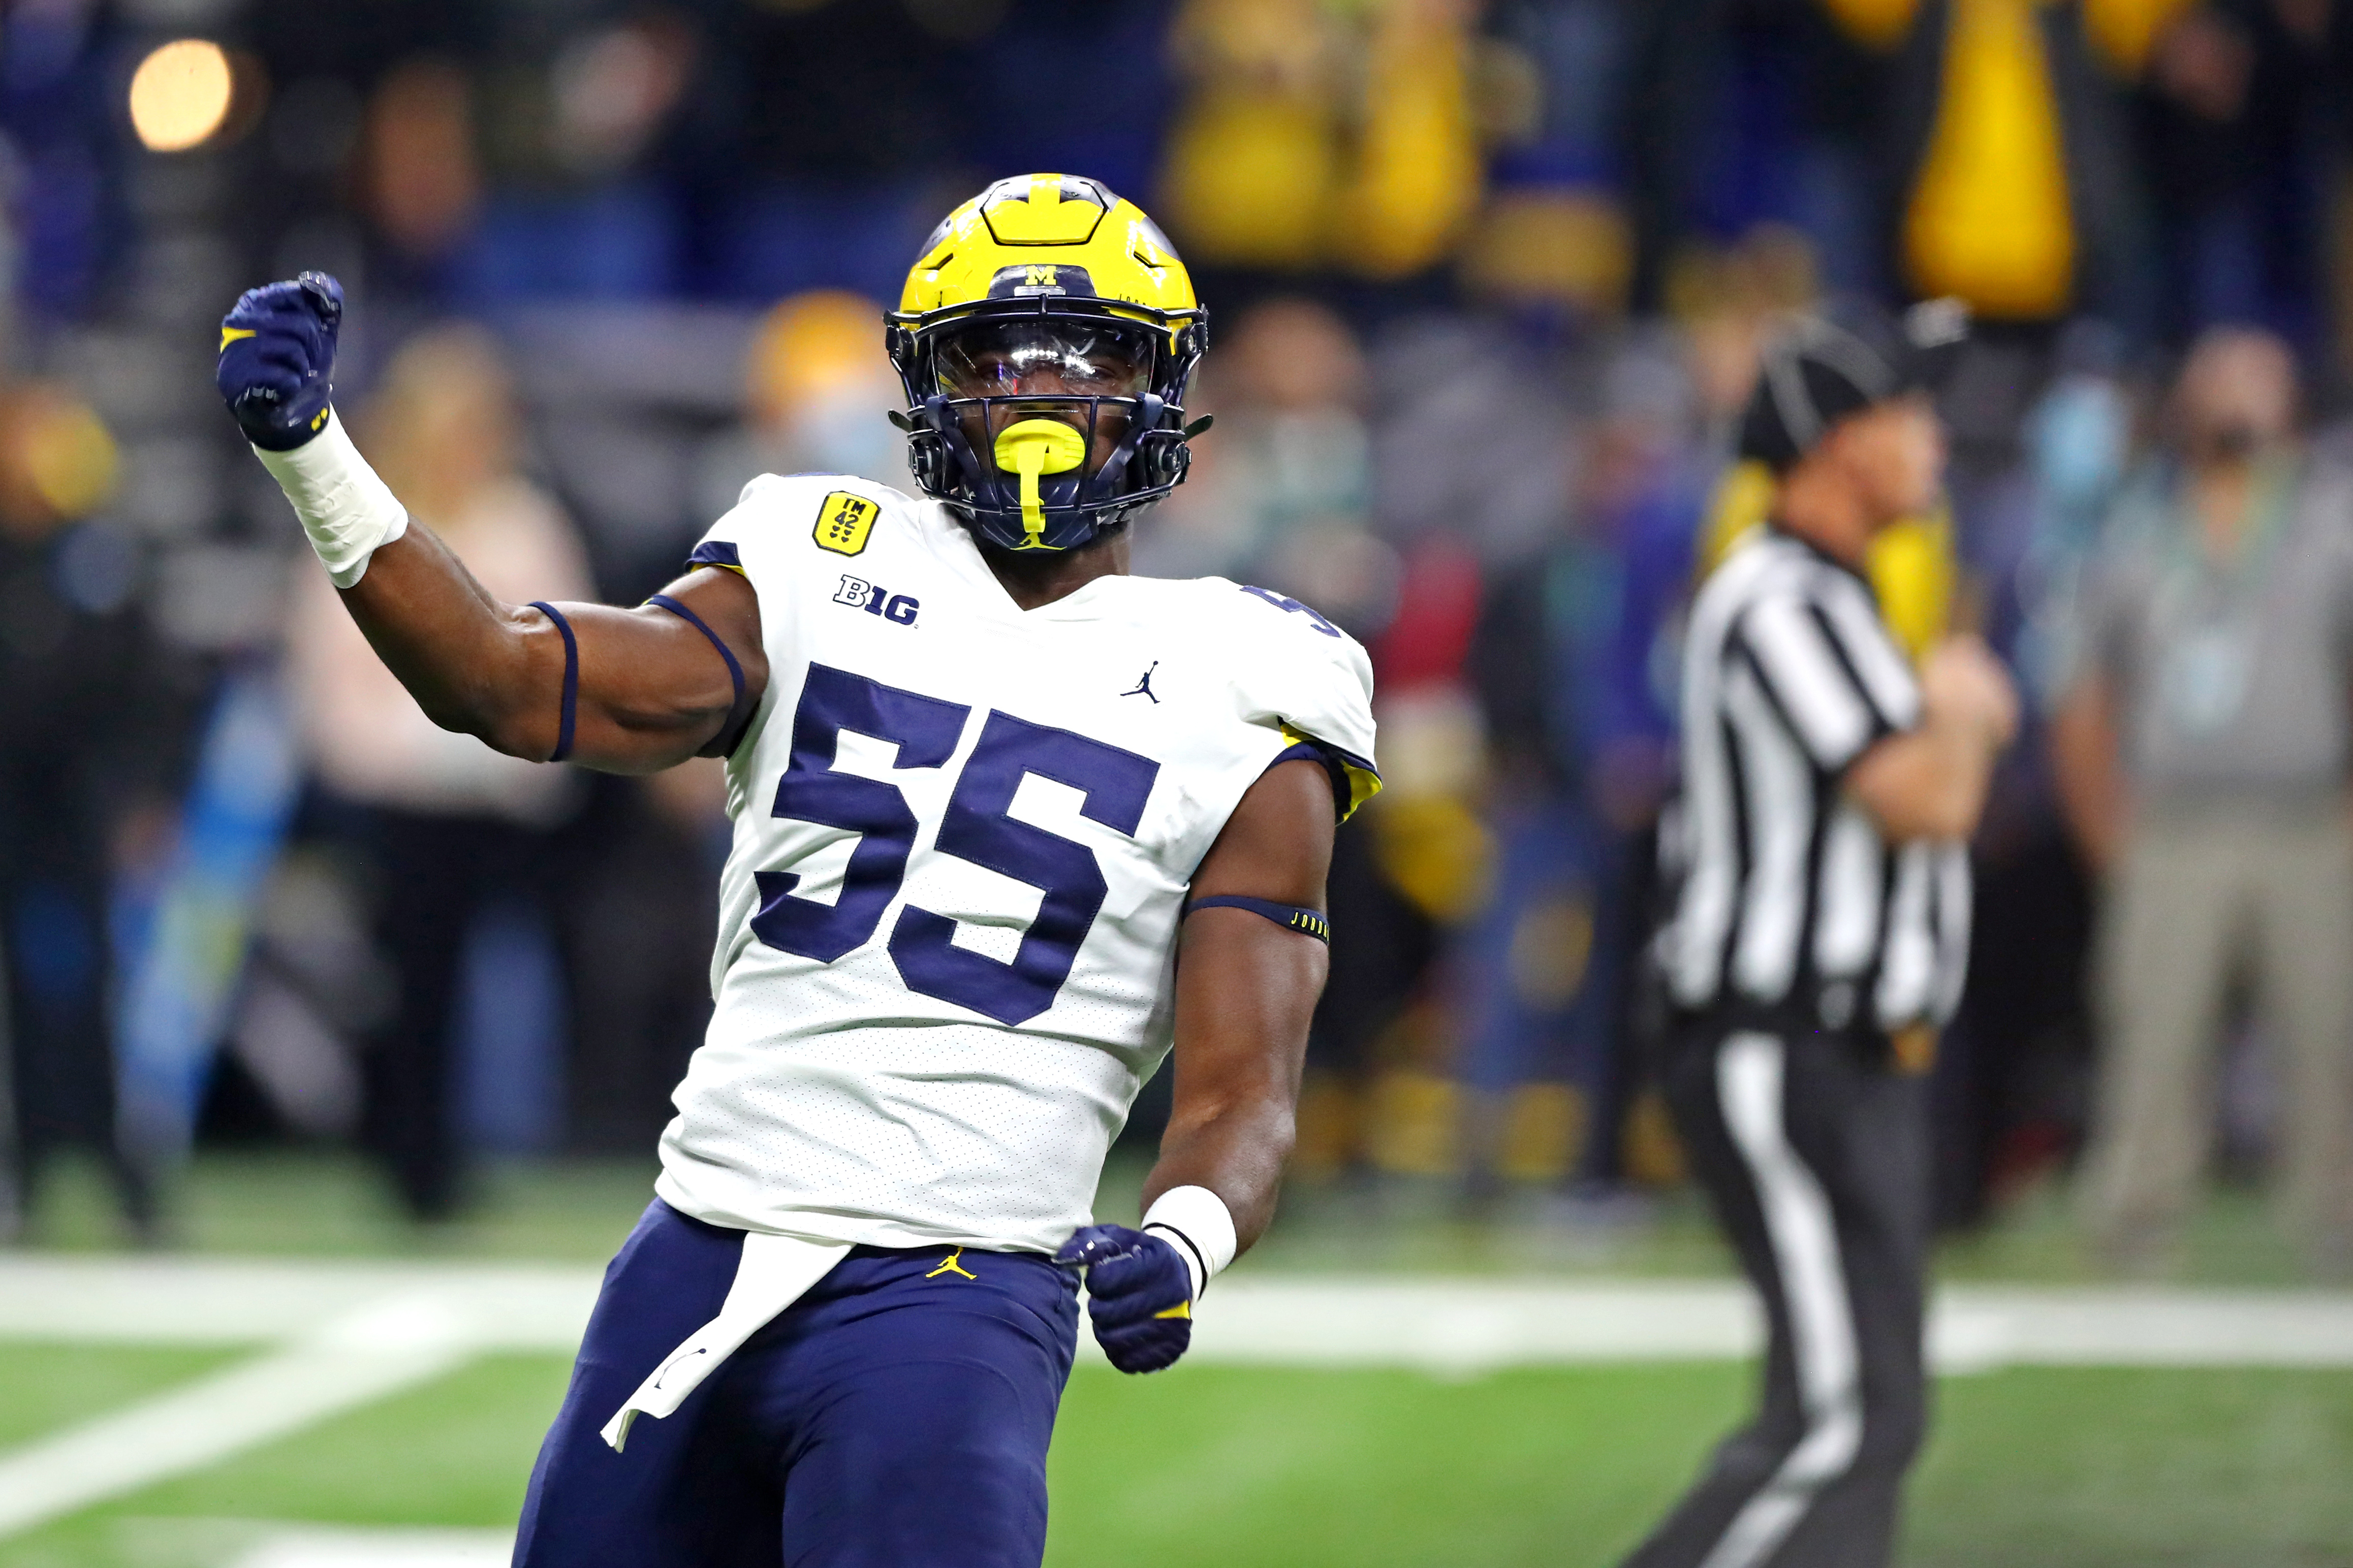 Dec 4, 2021; Indianapolis, IN, USA; Michigan Wolverines linebacker David Ojabo (55) reacts during the first quarter against the Iowa Hawkeyes in the Big Ten Conference championship game at Lucas Oil Stadium. Mandatory Credit: Mark J. Rebilas-USA TODAY Sports